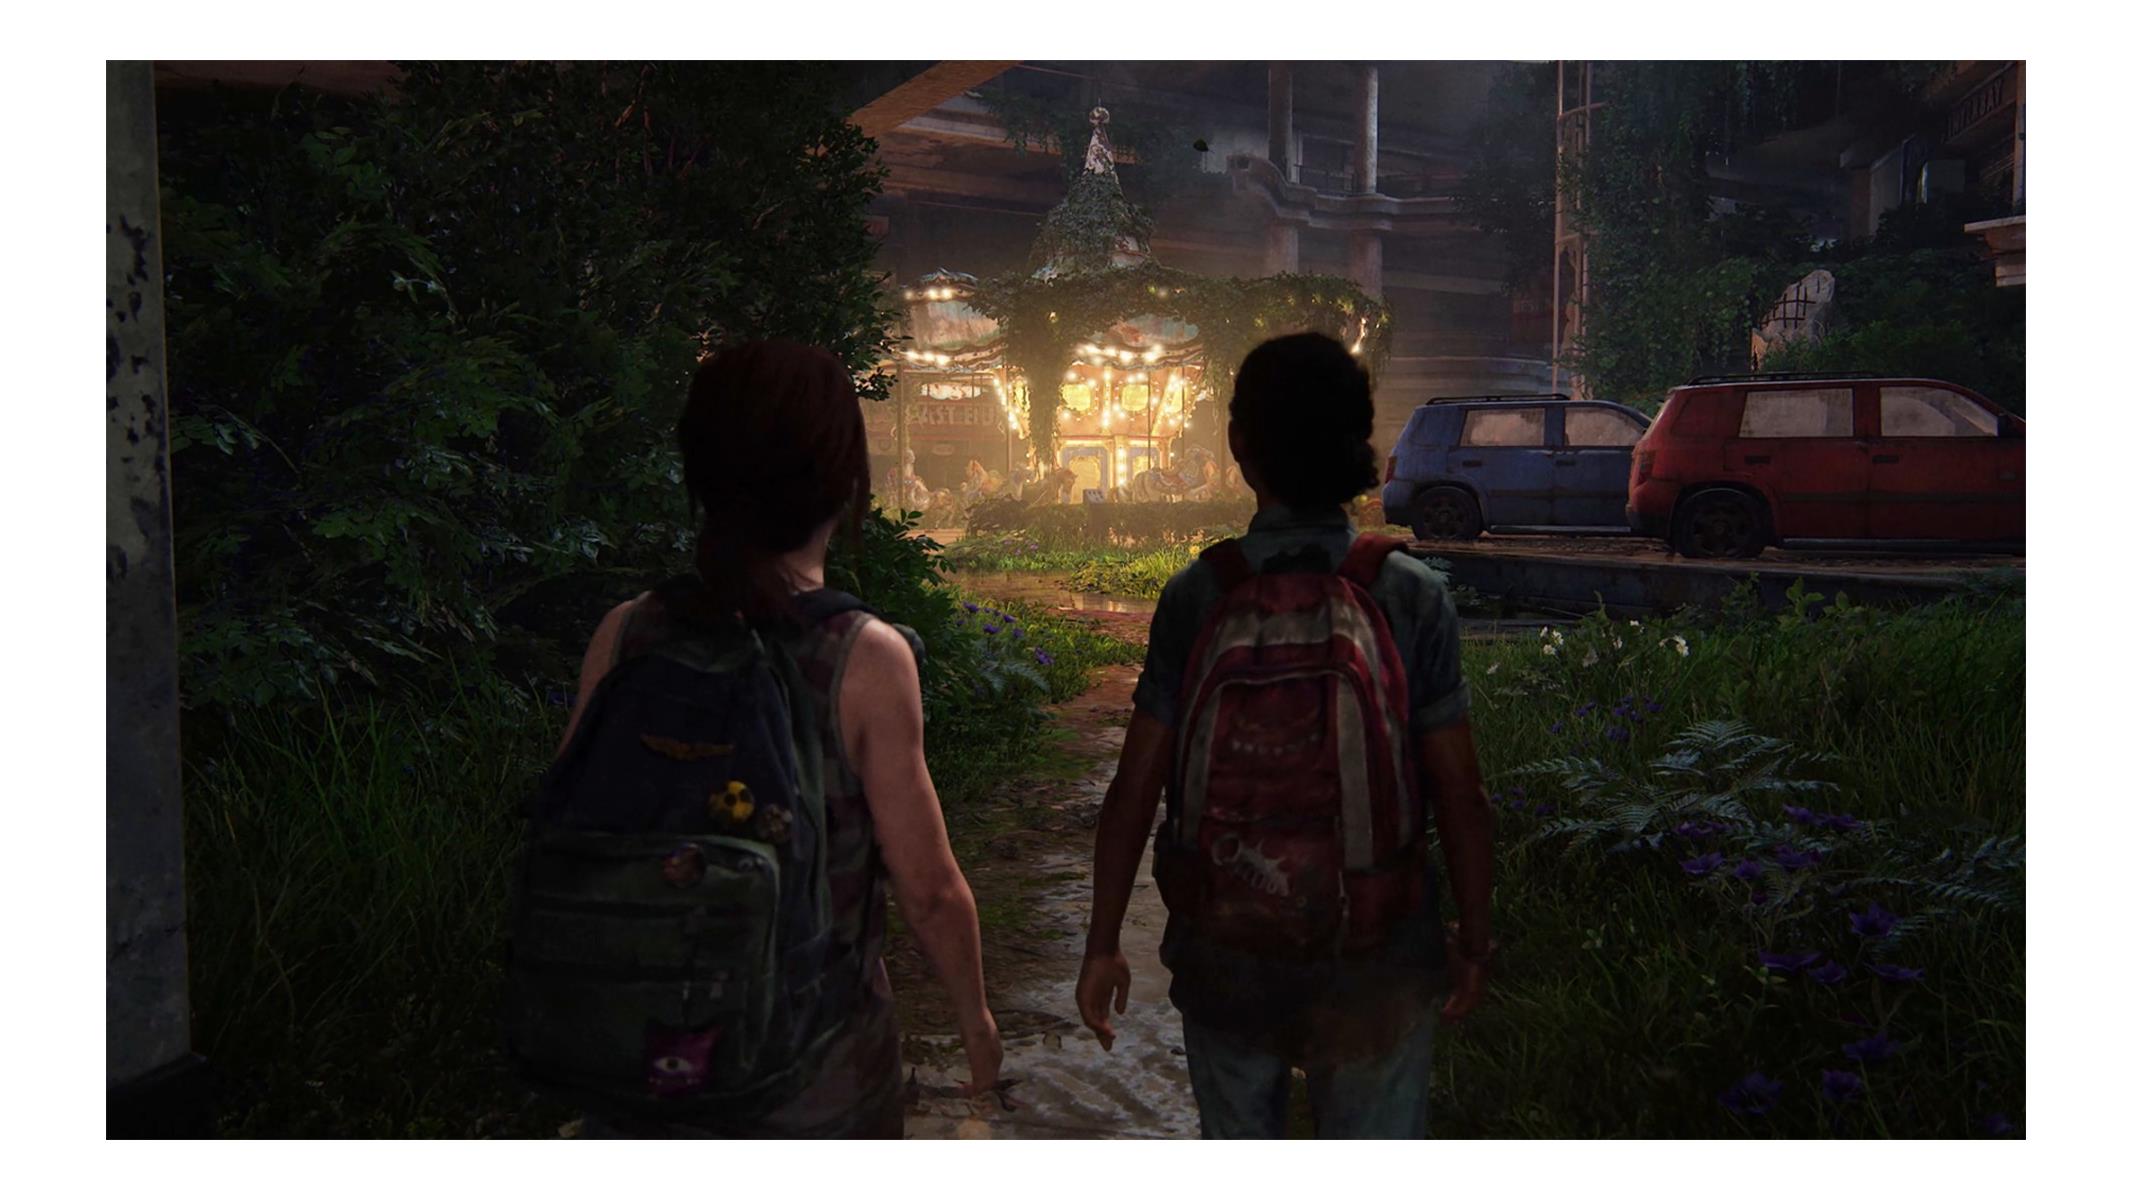 PlayStation releases The Last of Us Part 1's PC features and specs